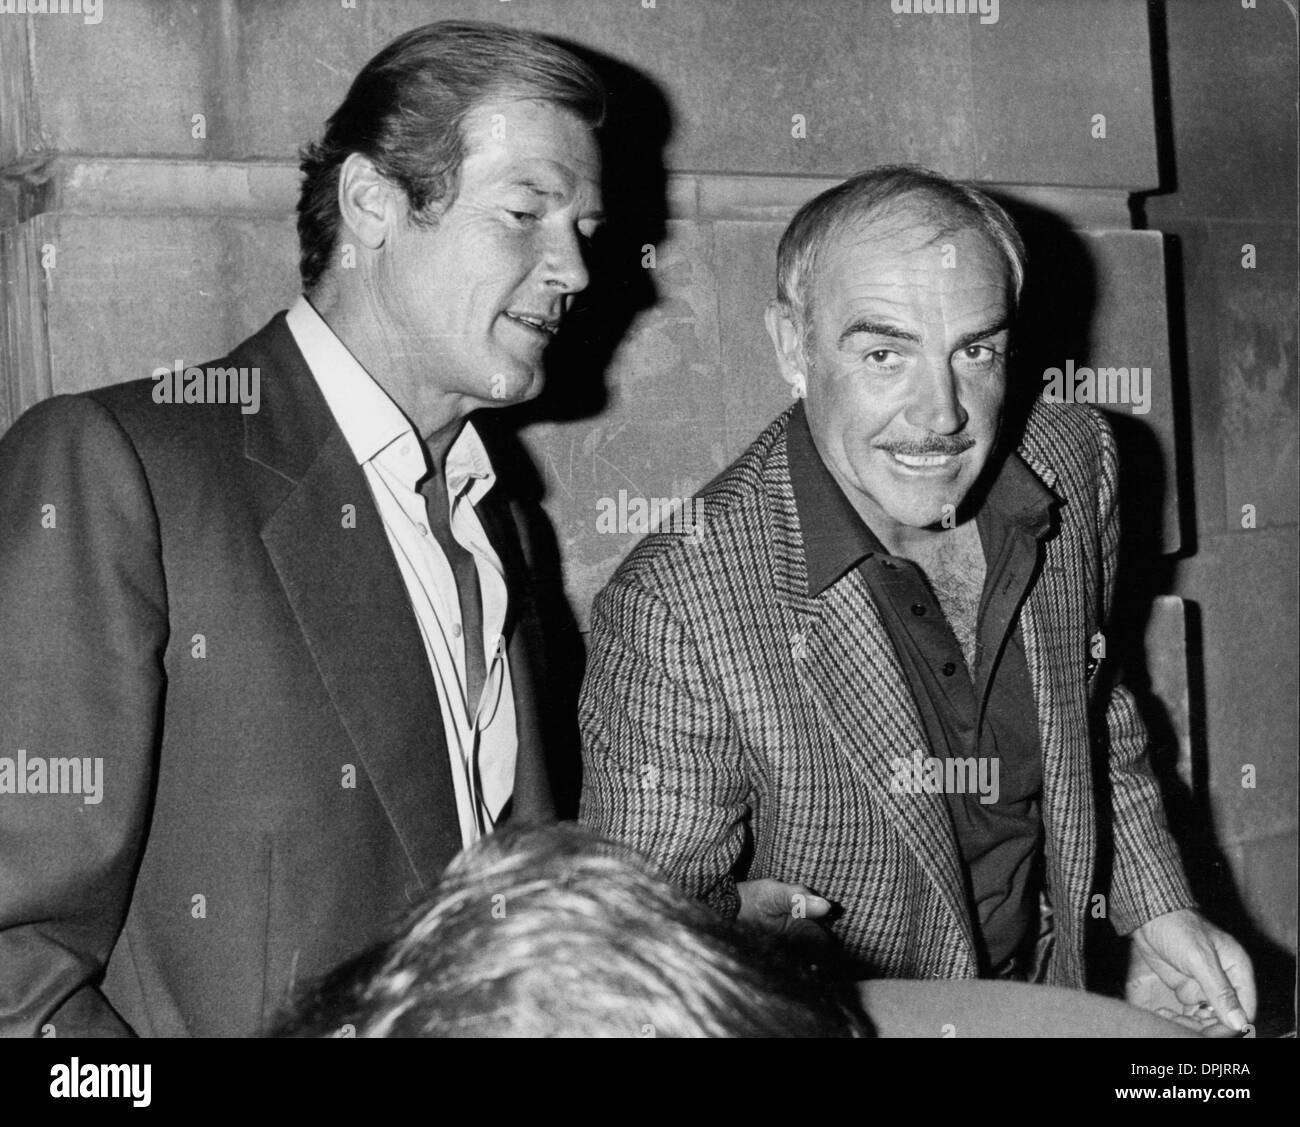 Roger Moore Sean Connery